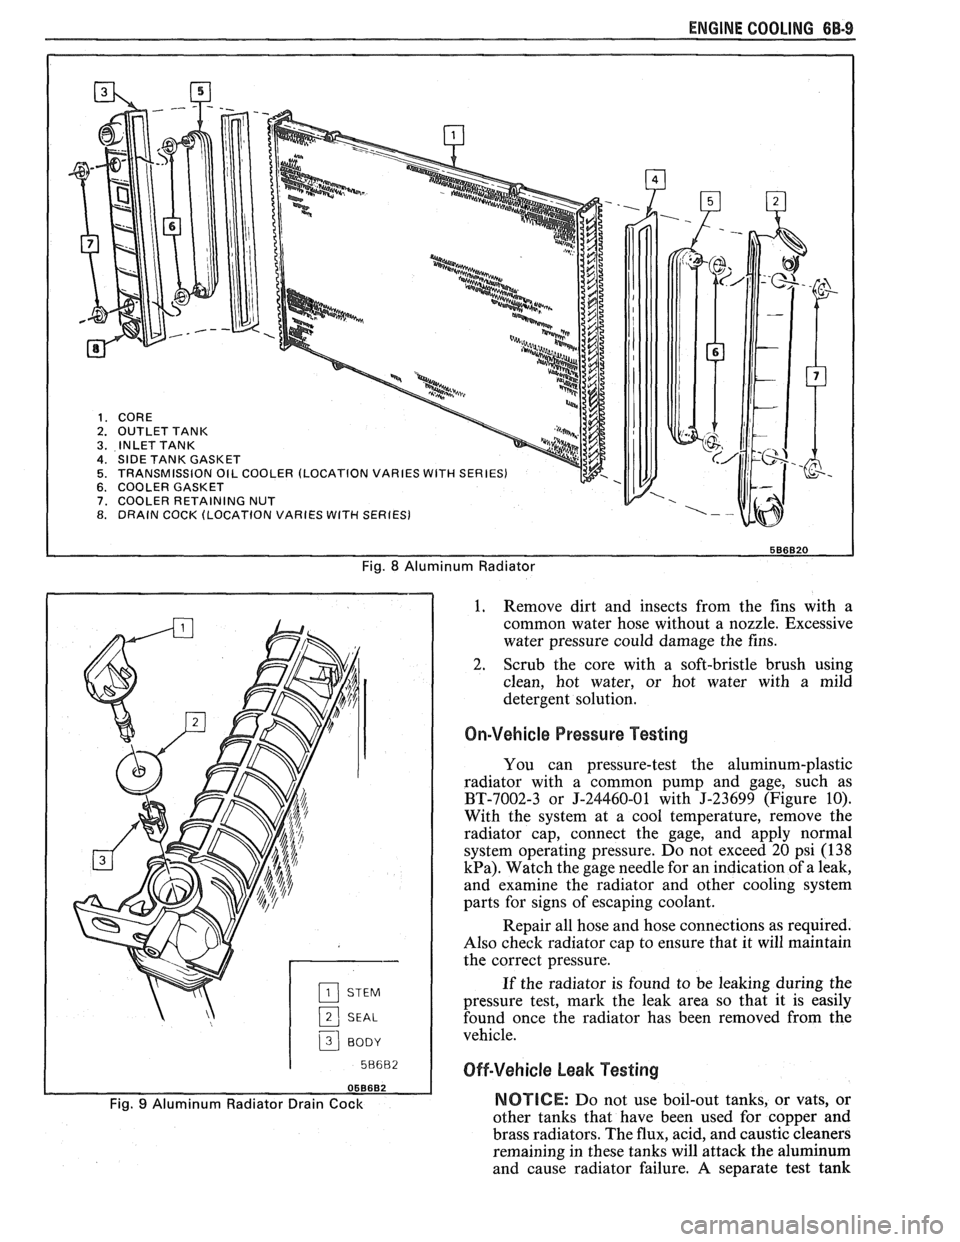 PONTIAC FIERO 1988  Service Owners Manual 
ENGINE COOLING 6B-9 
Fig. 8 Aluminum Radiator 
2 SEAL 
3 BODY I 
1. Remove 
dirt  and  insects from the fins  with  a 
common  water  hose without  a nozzle.  Excessive 
water  pressure  could  damag